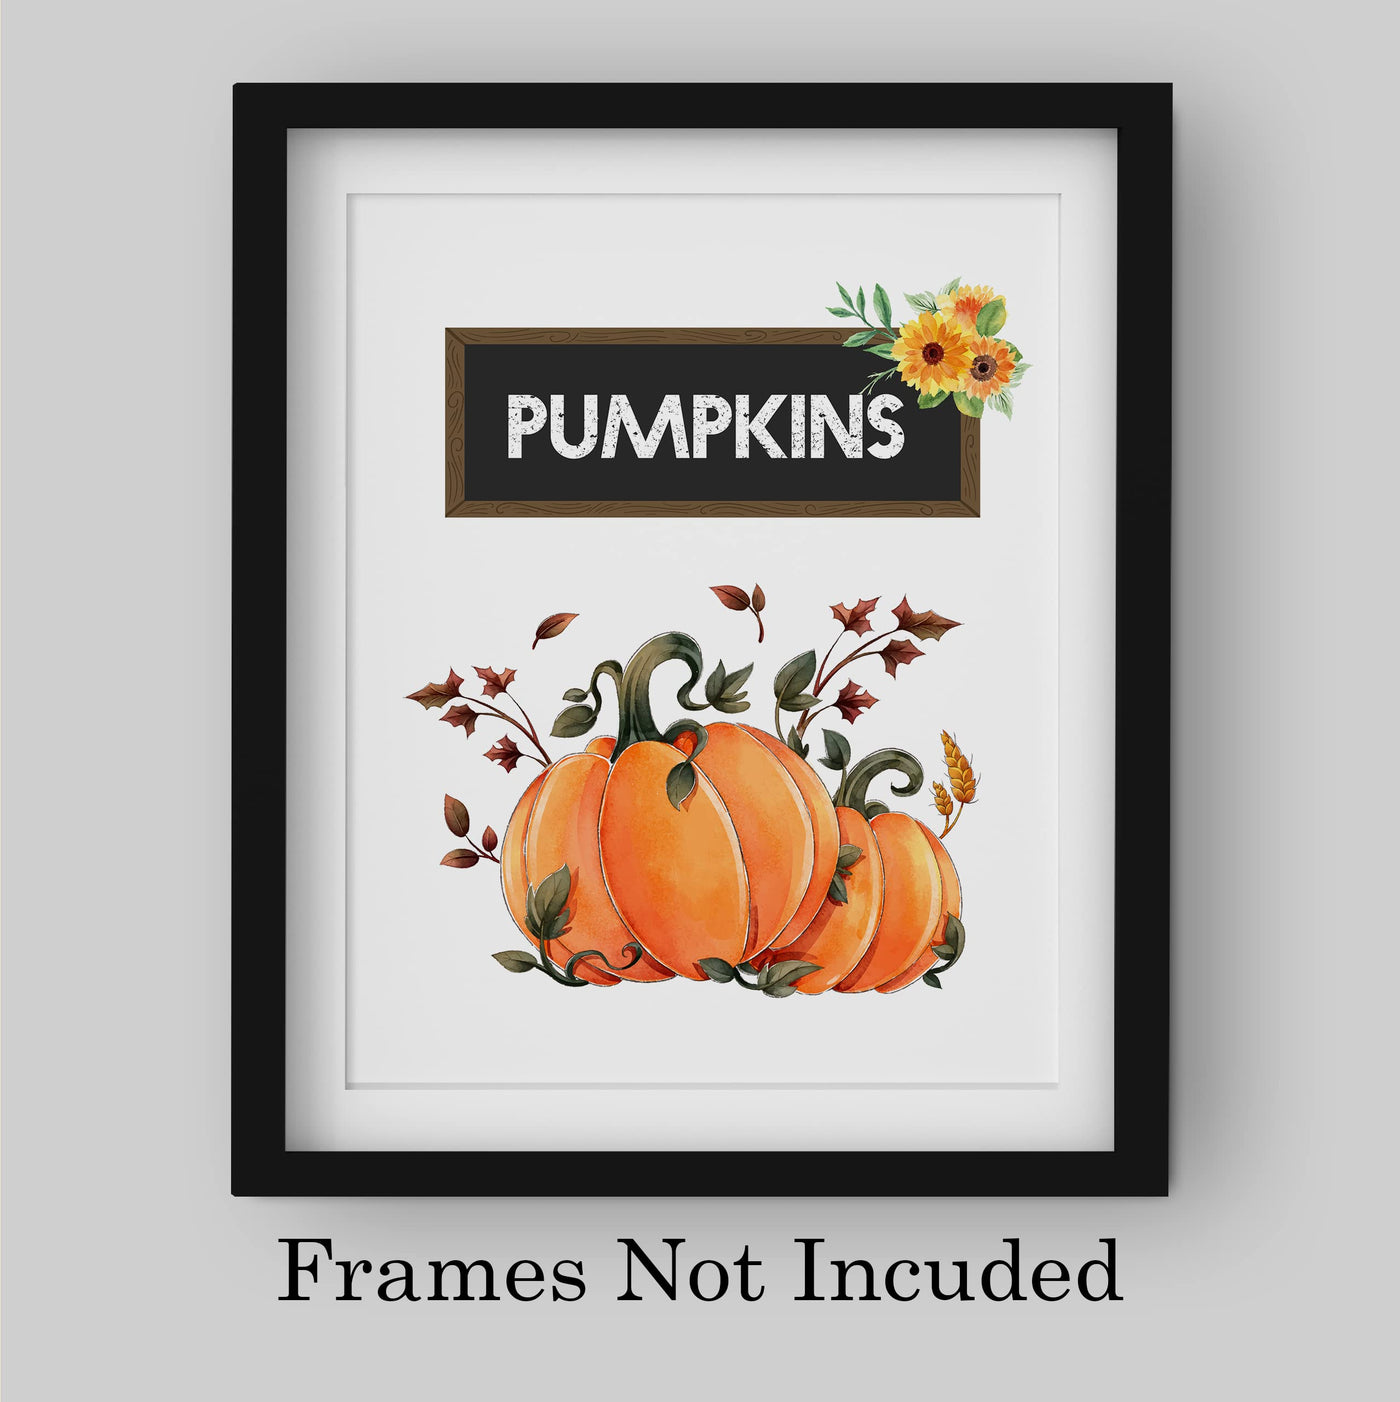 Pumpkins-Vintage Fall Wall Art Decor -8 x 10" Rustic Farmhouse Pumpkin Print w/Sunflower Images -Ready to Frame. Perfect for Home-Halloween-Thanksgiving-Sunflowers Decor! Printed on Photo Paper.